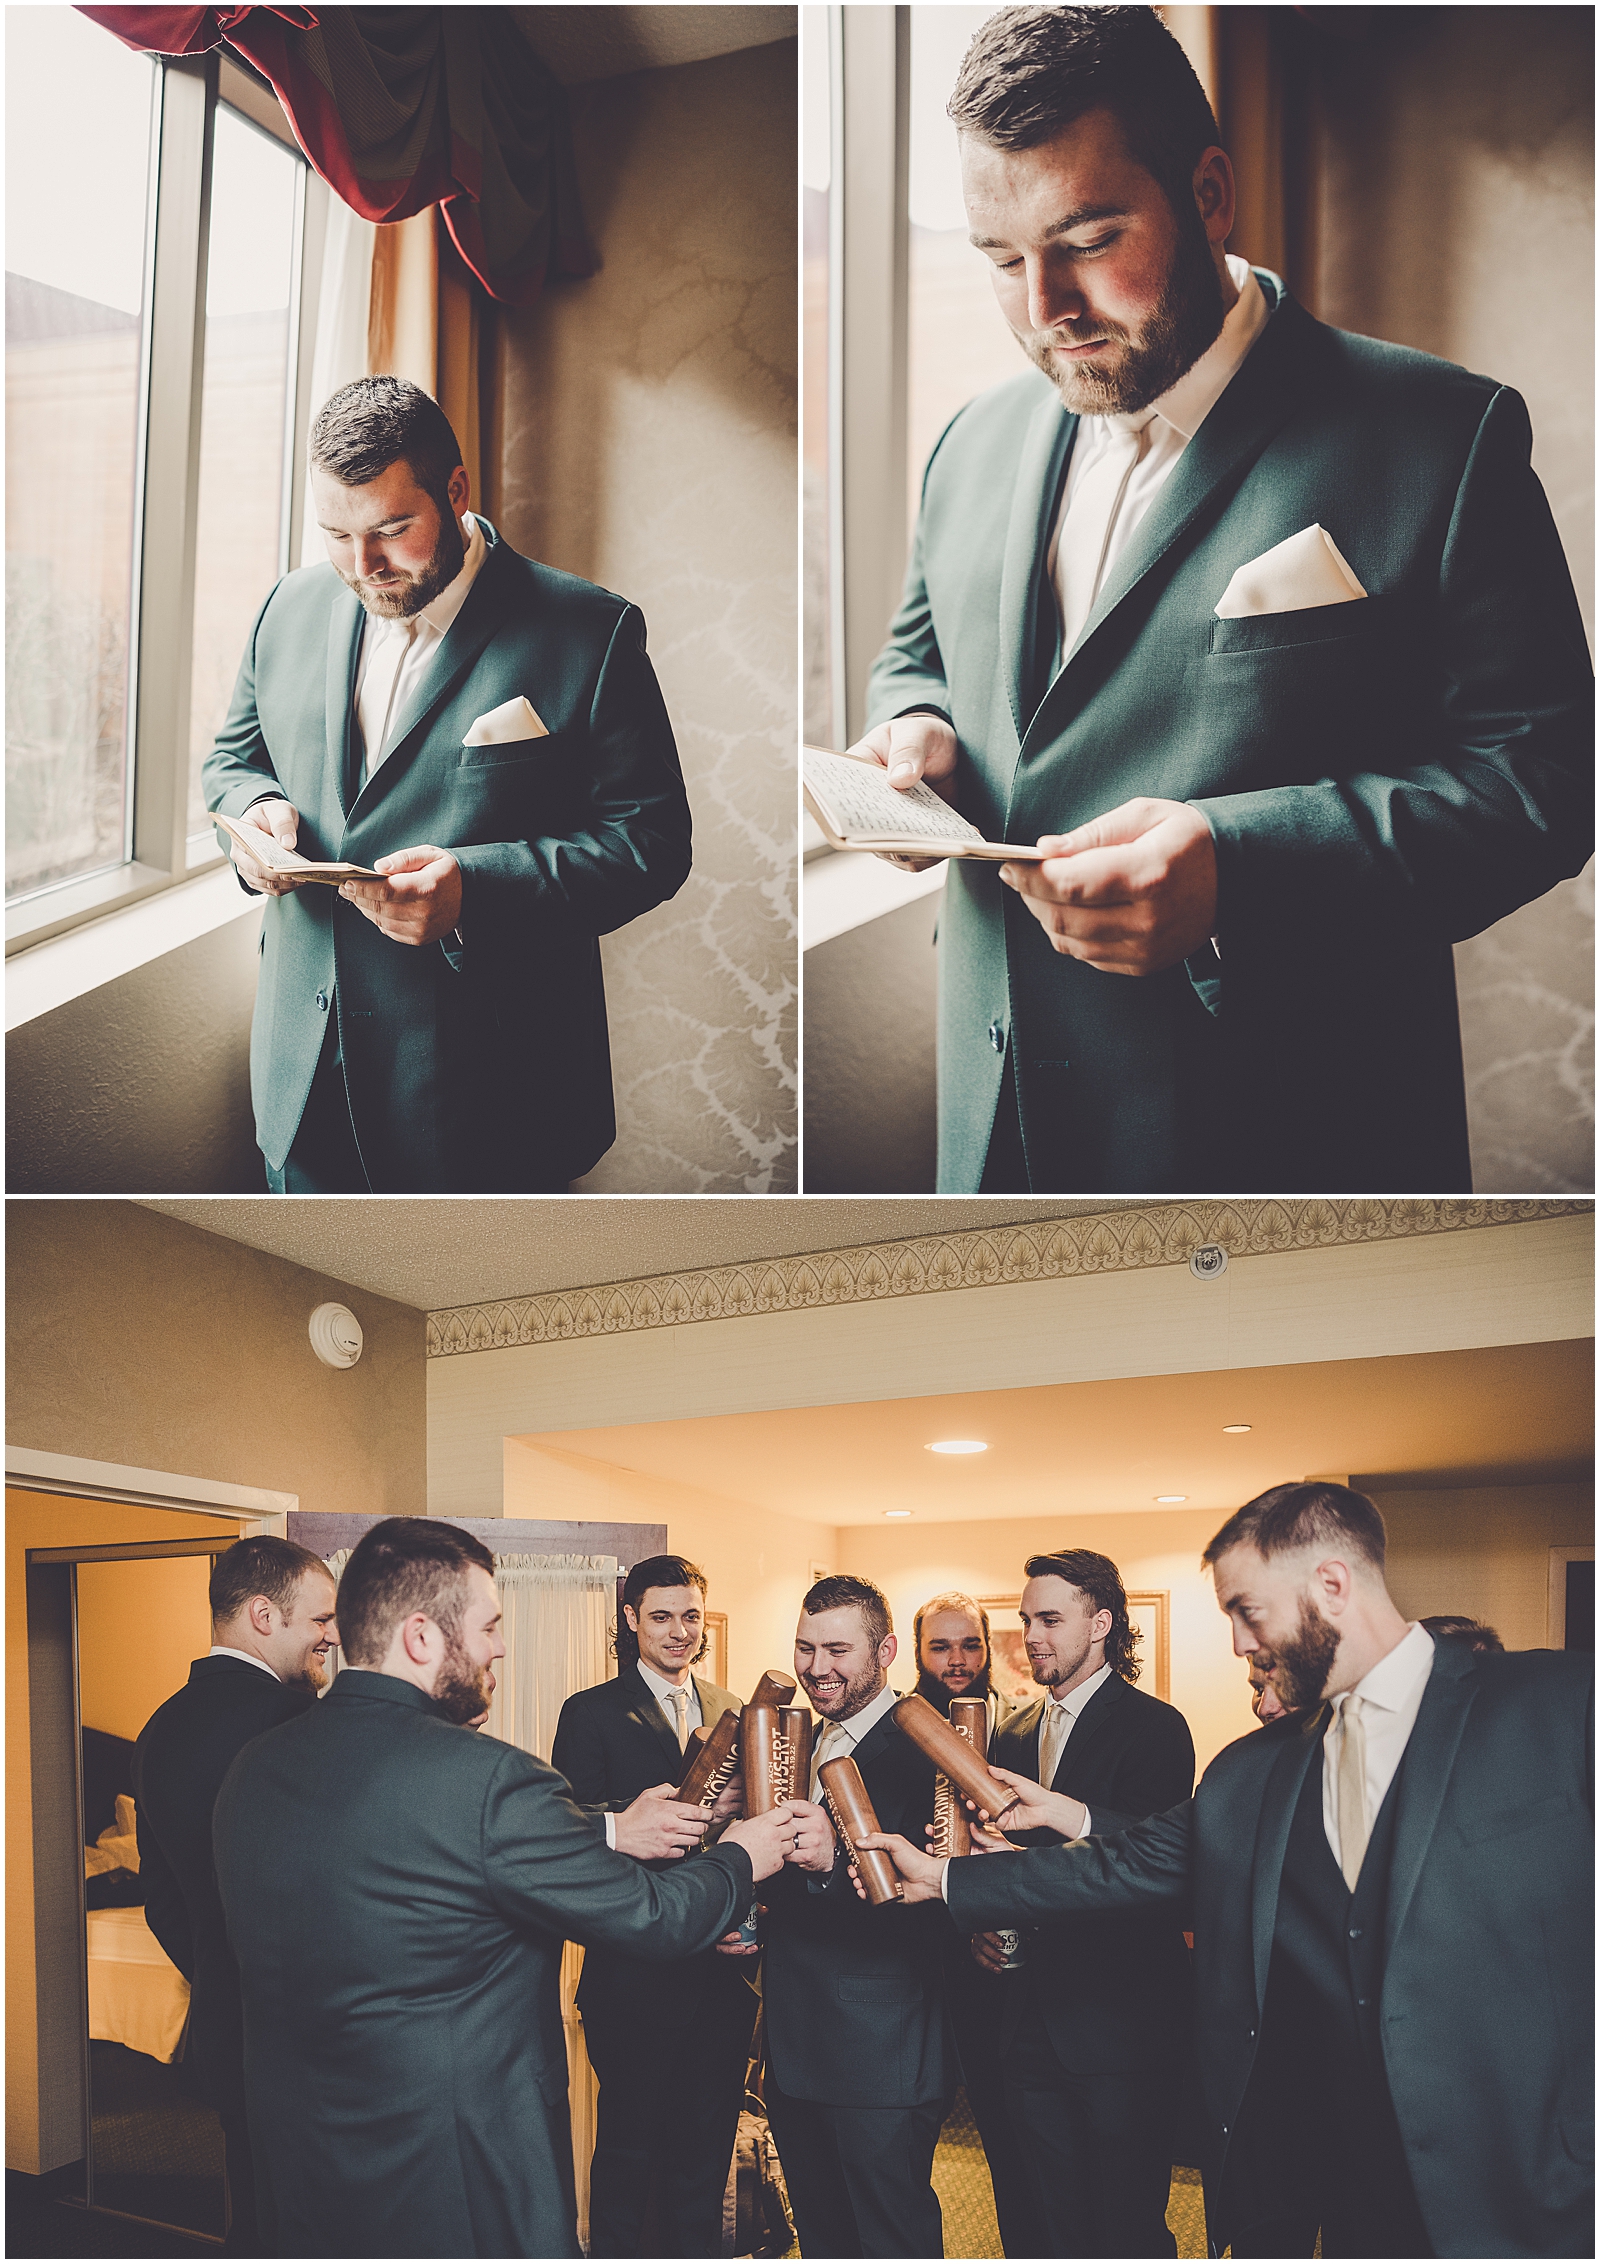 Andrea & Zach's wedding at The BRIX on the Fox in Carpentersville, IL with Chicagoland wedding photographer Kara Evans Photographer.